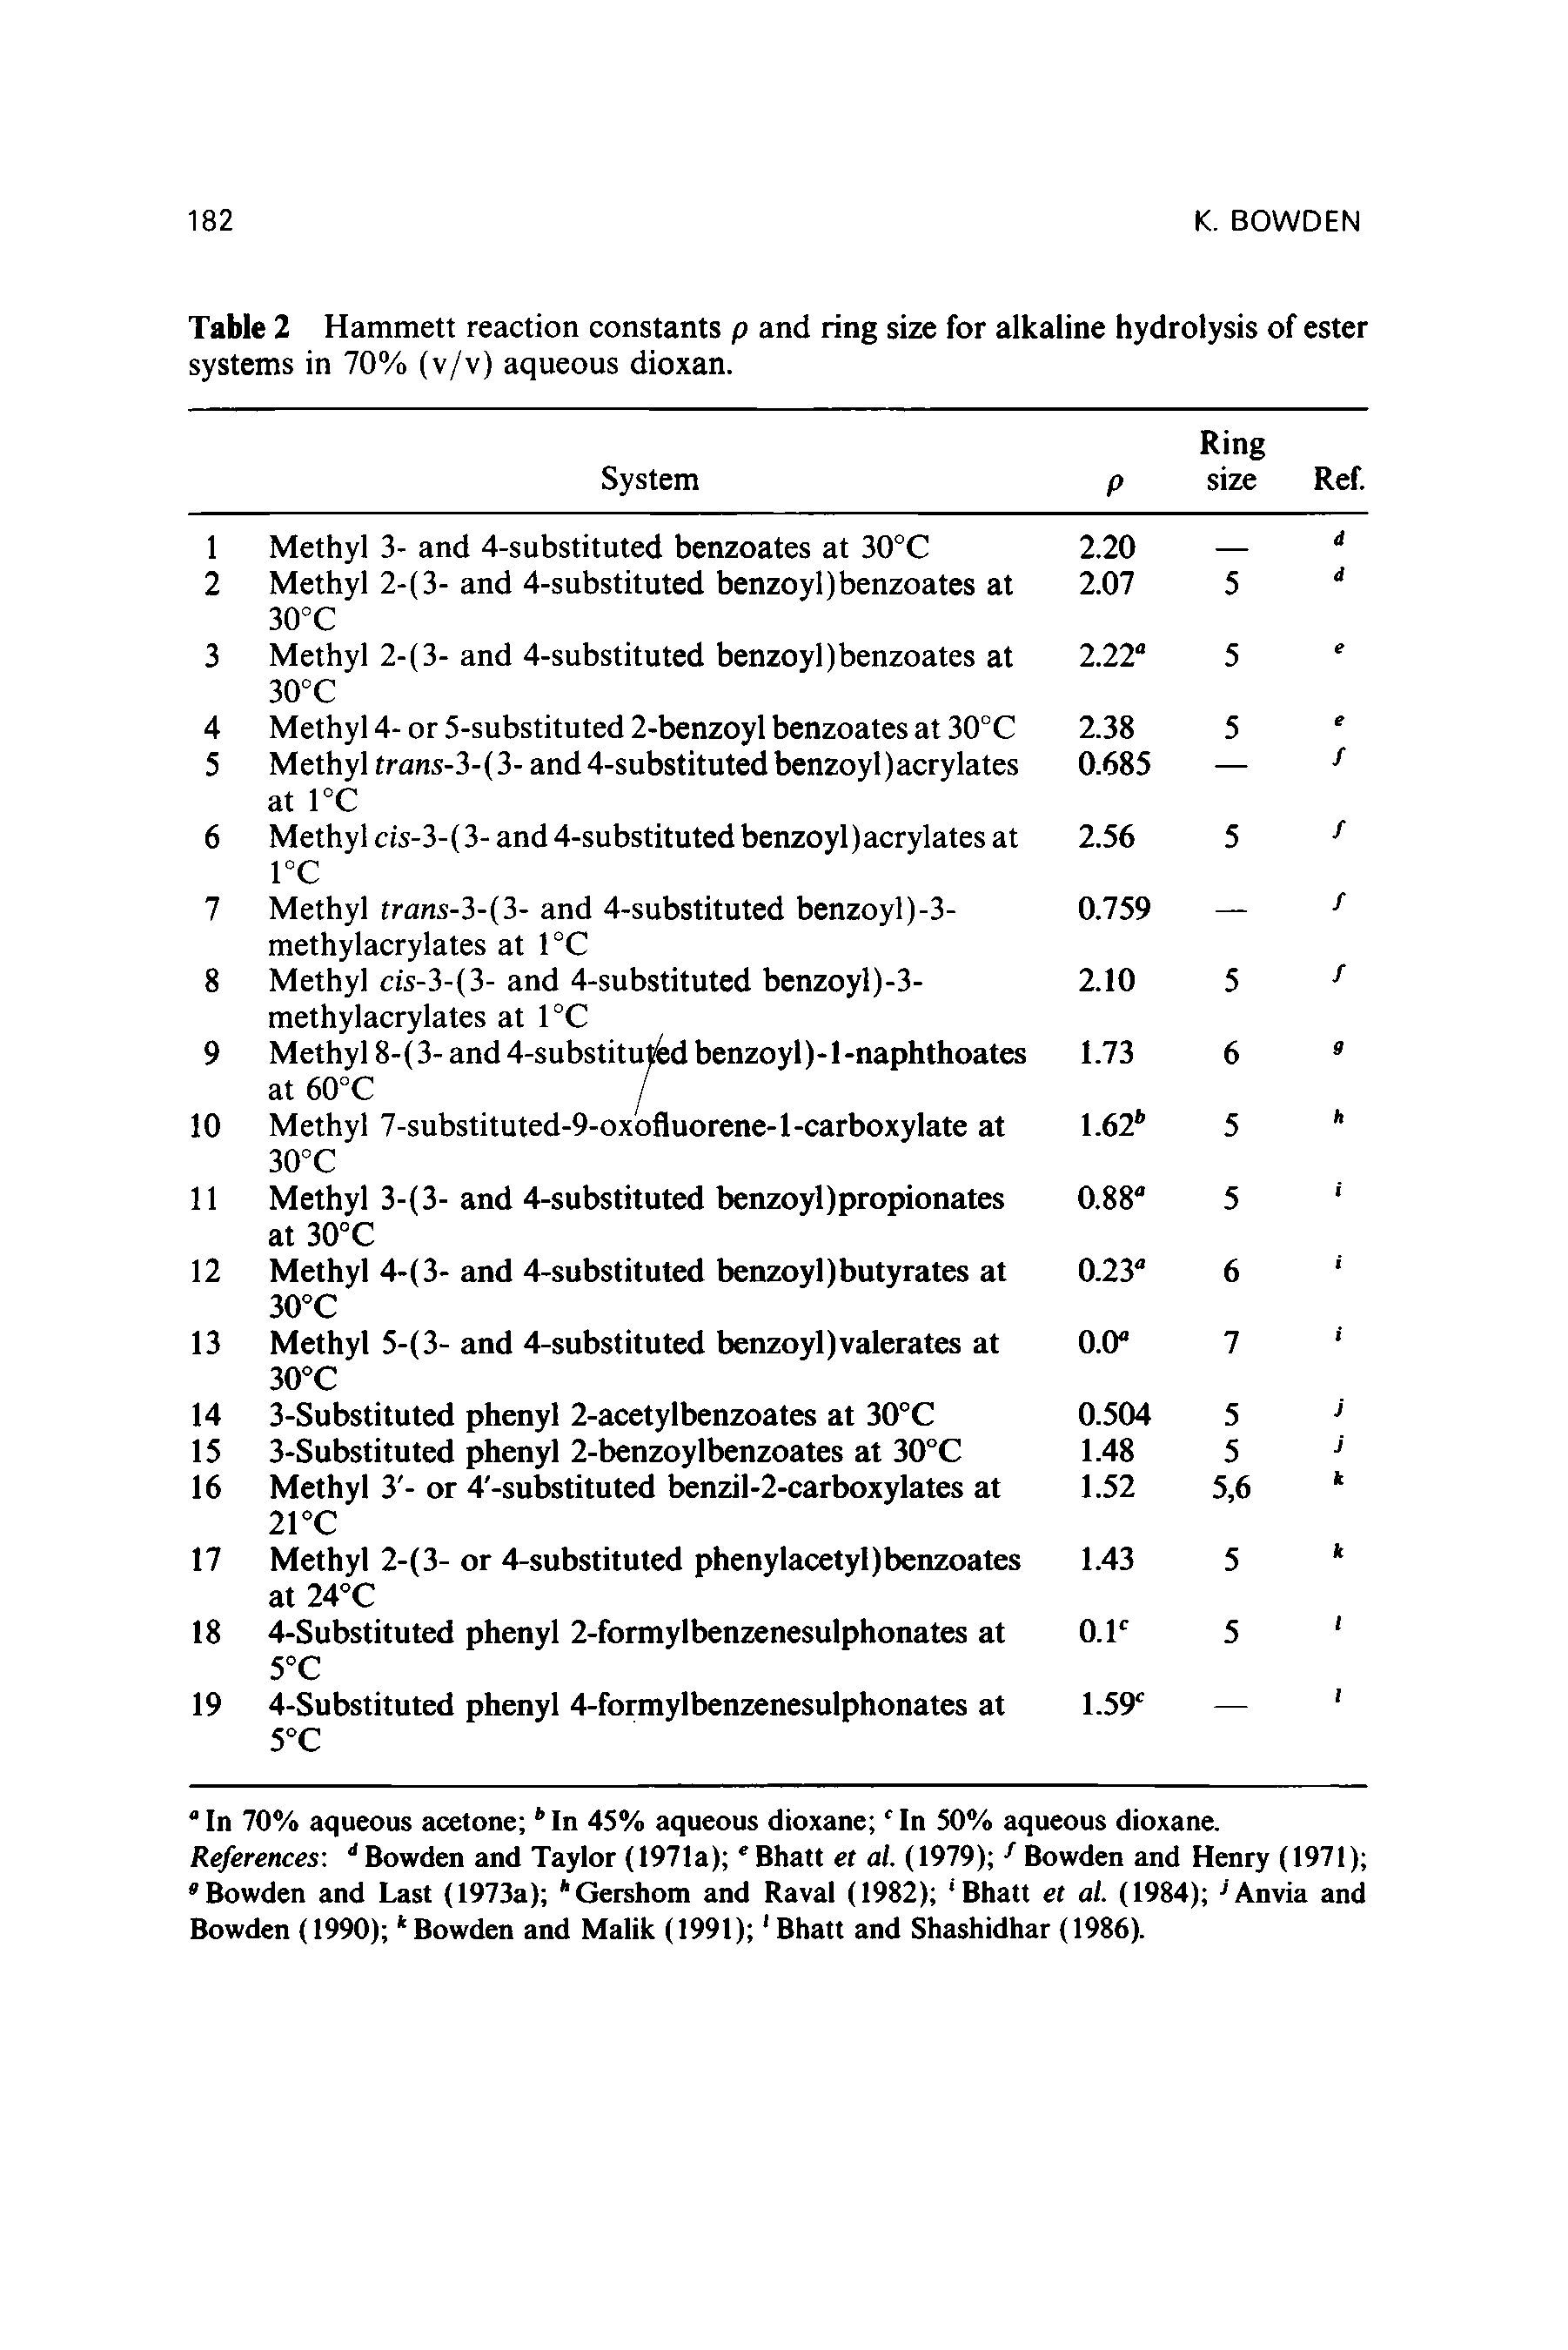 Table 2 Hammett reaction constants p and ring size for alkaline hydrolysis of ester systems in 70% (v/v) aqueous dioxan.